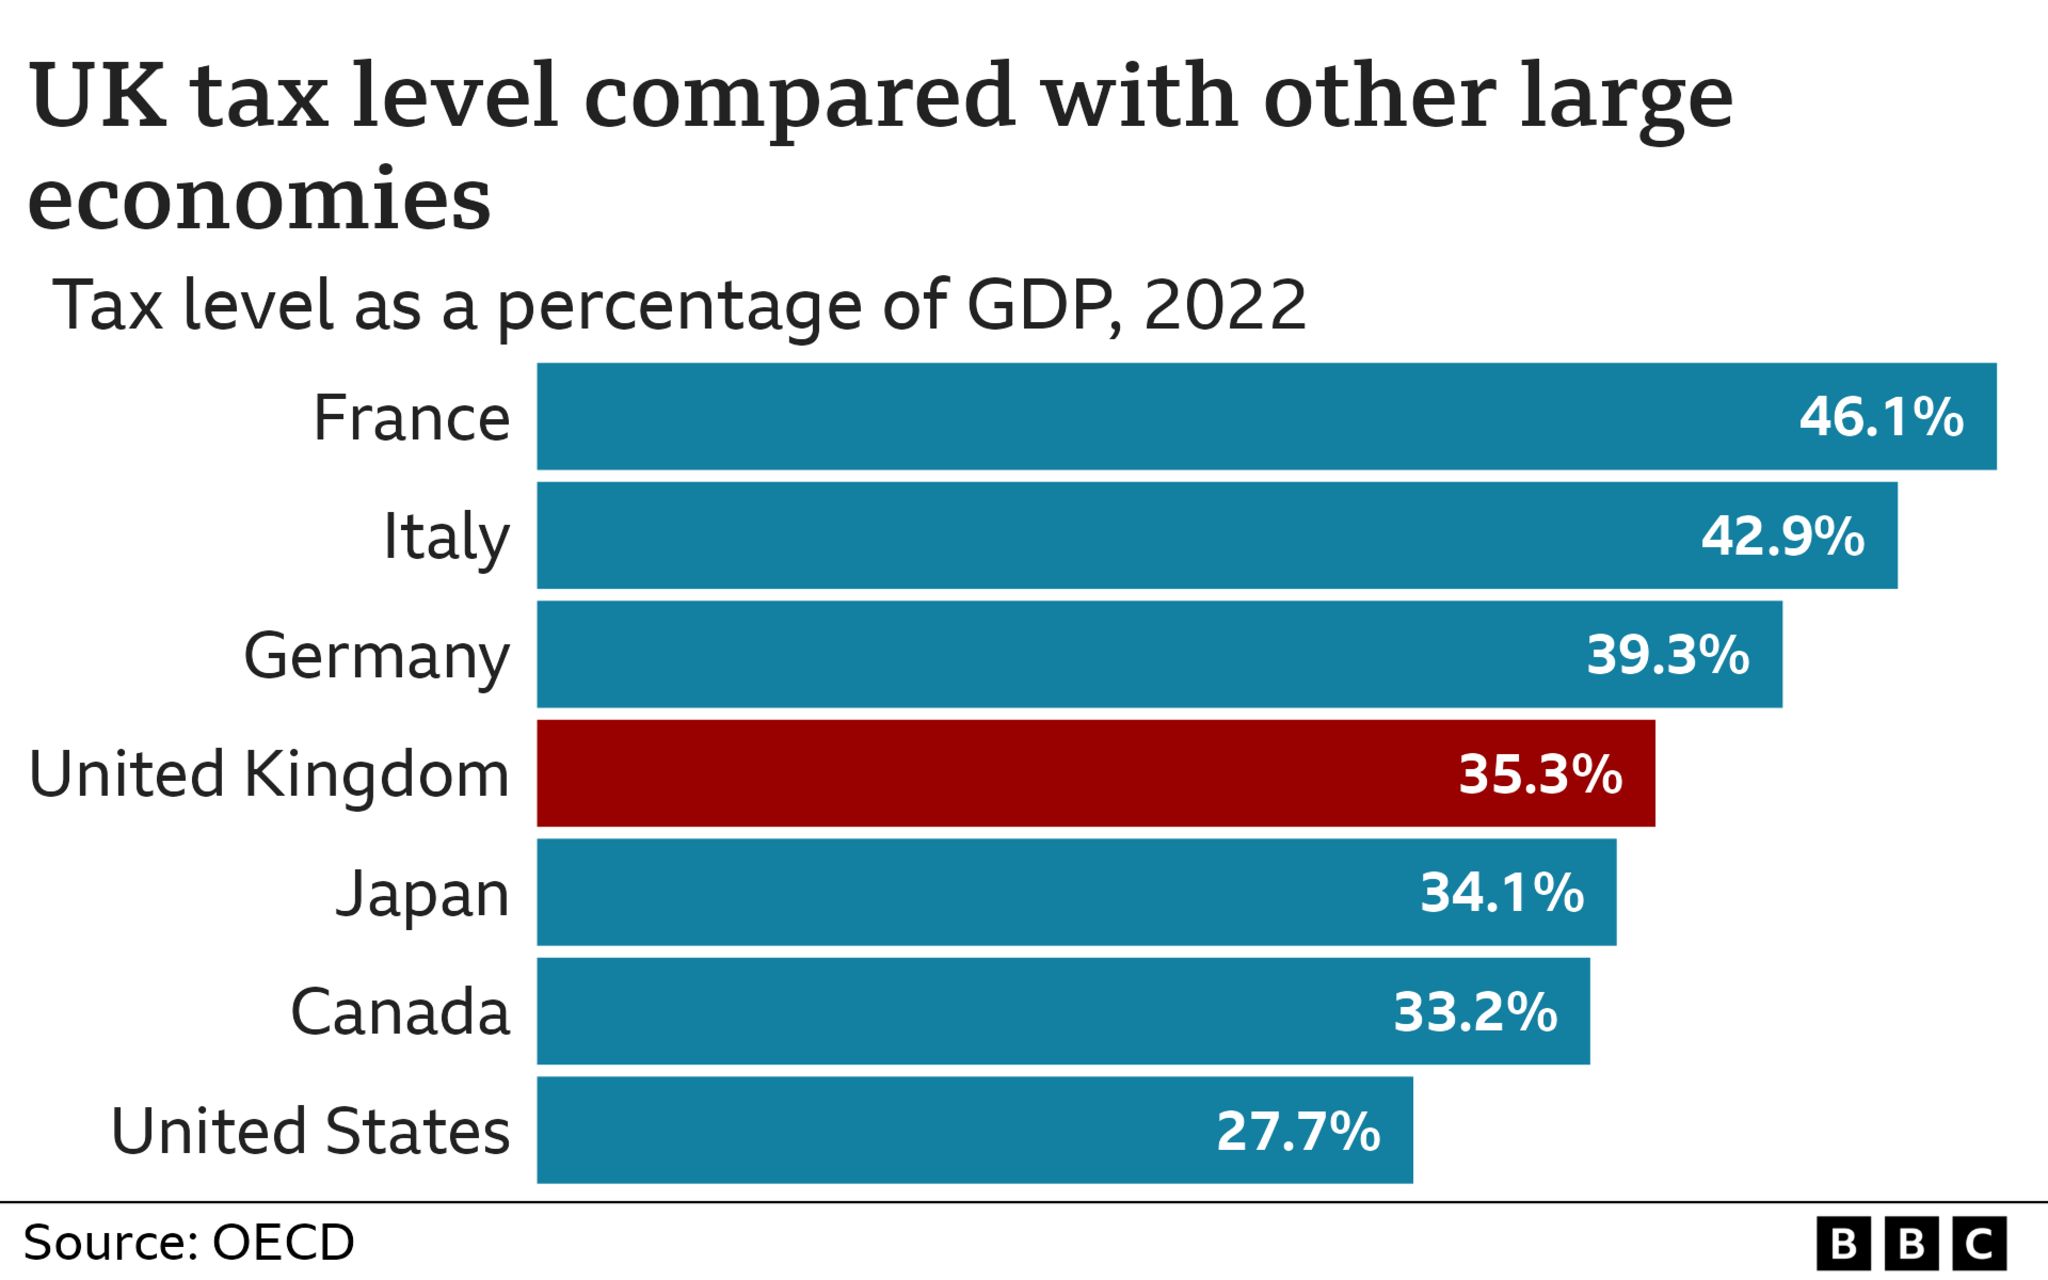 Bar chart showing tax revenue as a percentage of GDP. The United Kingdom's tax level is relatively low compared to other advanced economies, with a value of 35.3% in 2022.